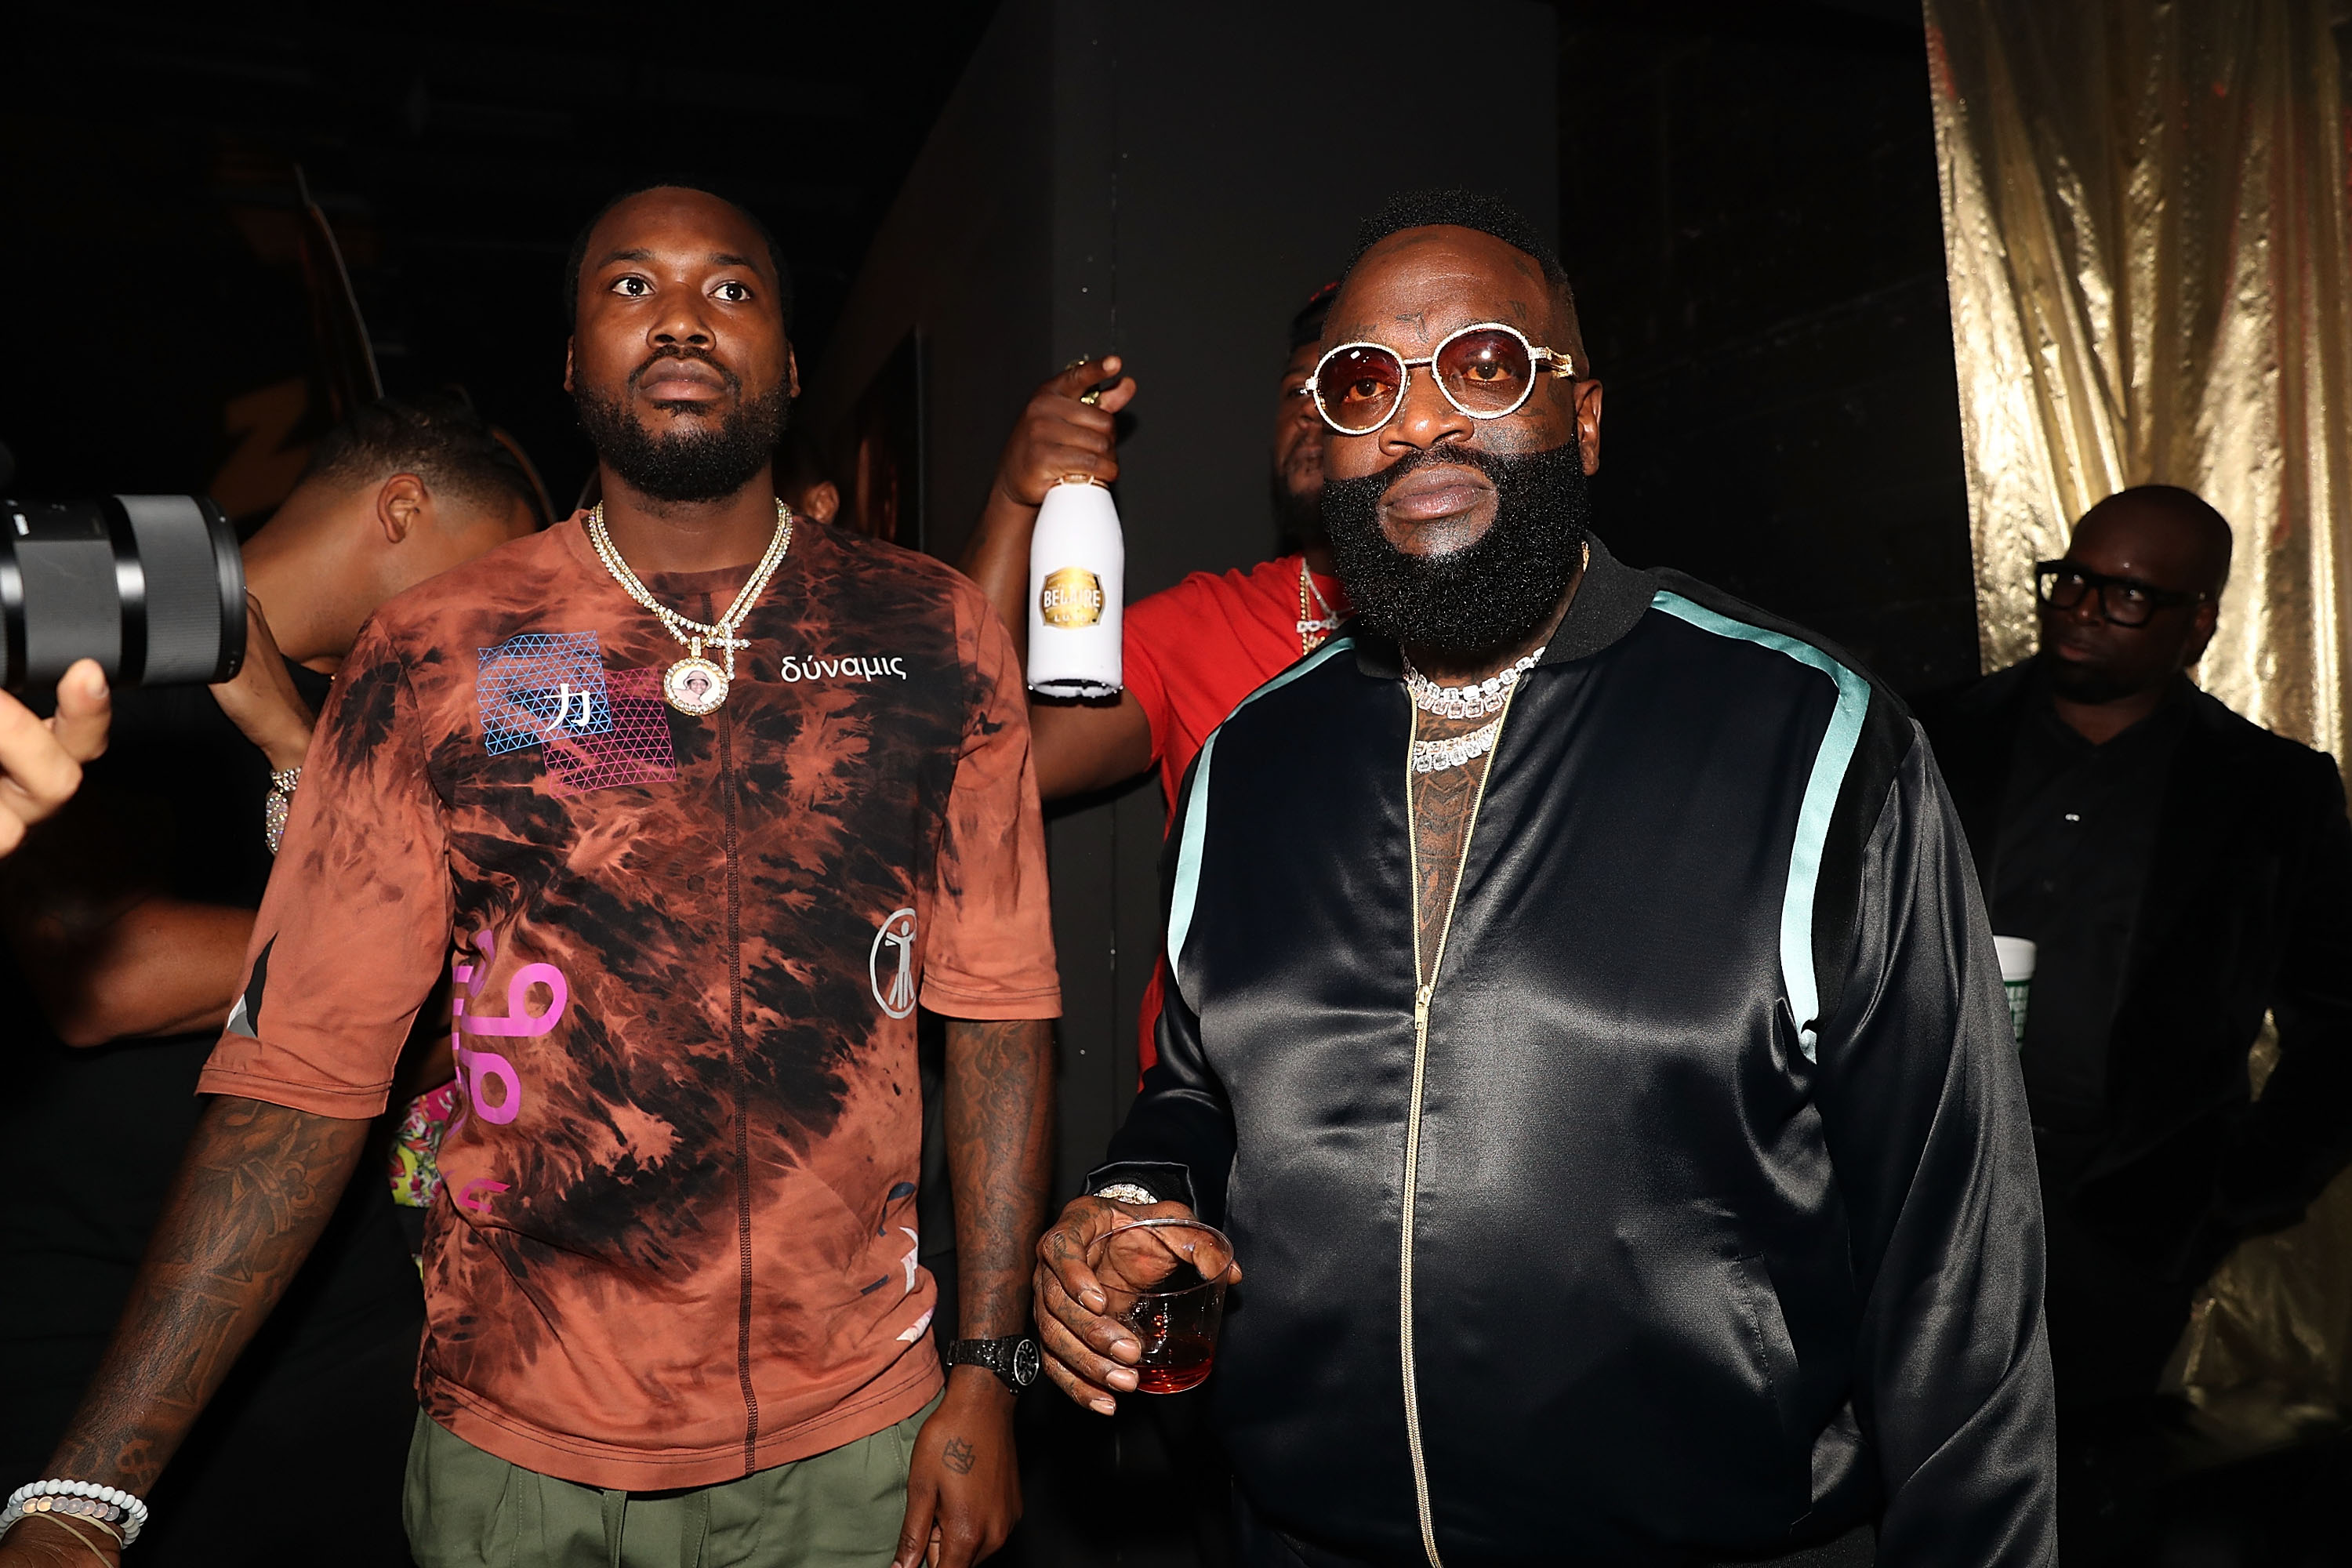 Rick Ross and Meek Mill Tease New Music